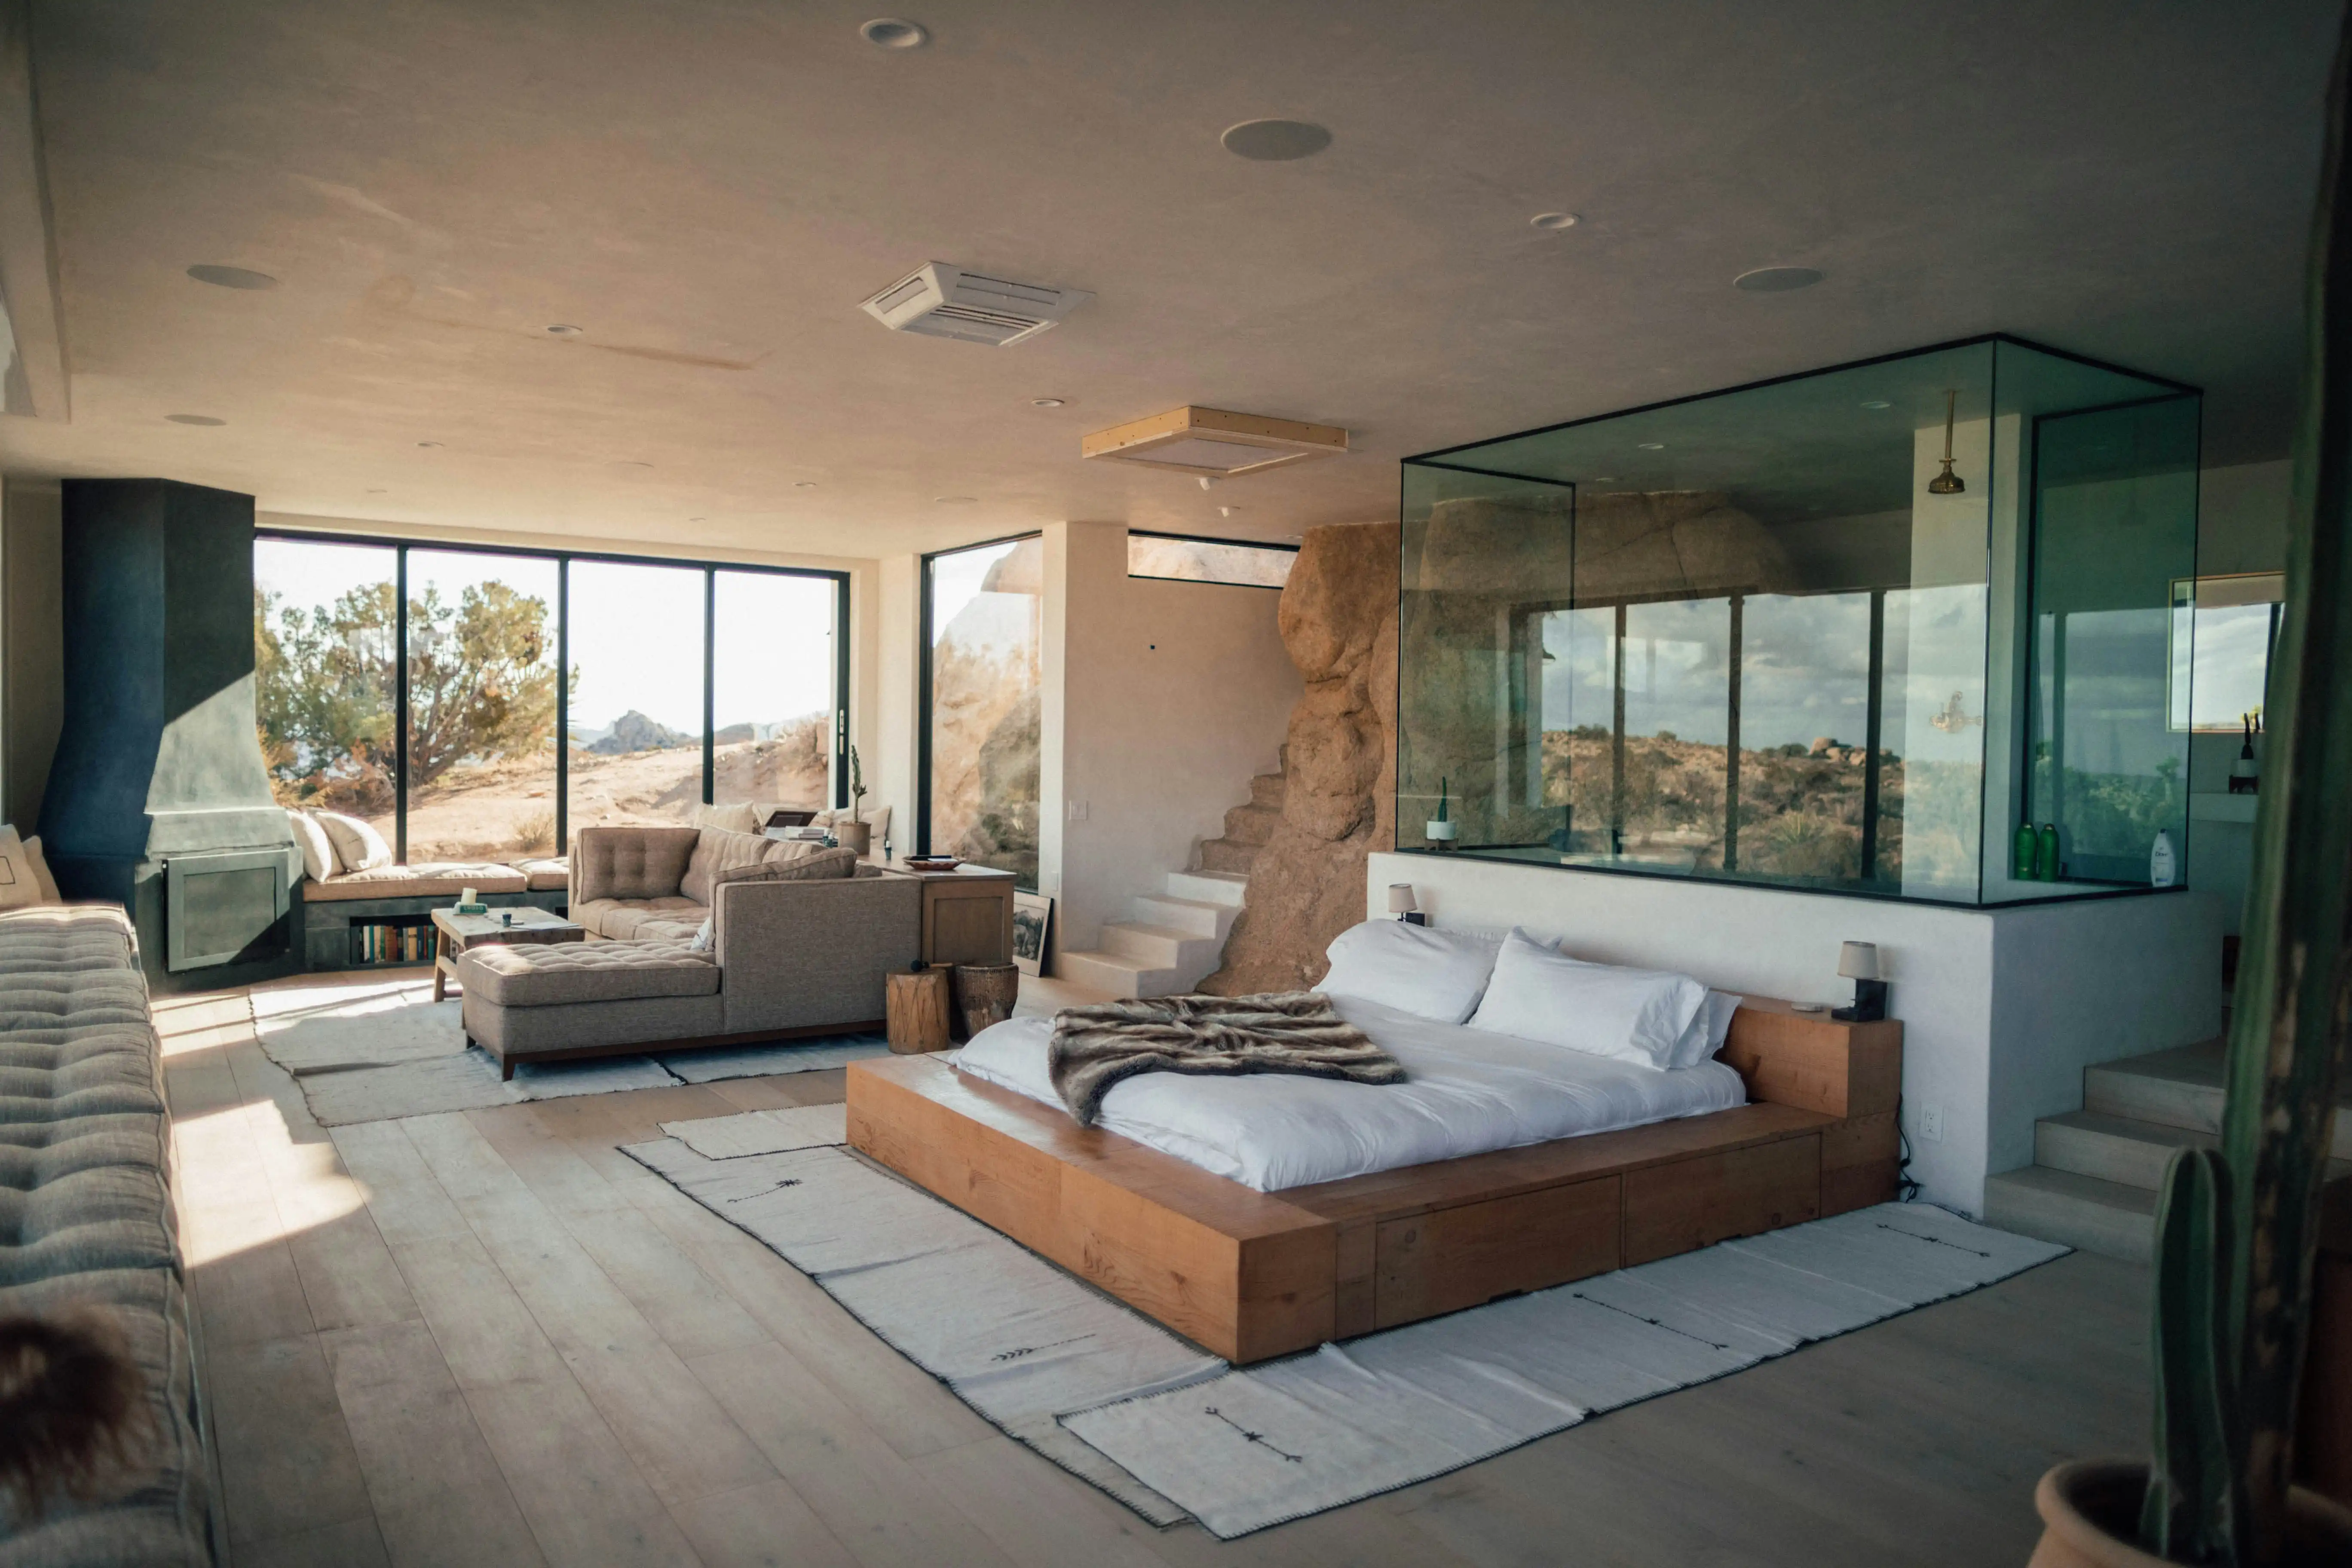 A luxury bedroom built into the rocky landscape, with large windows that showcase the natural world outside.